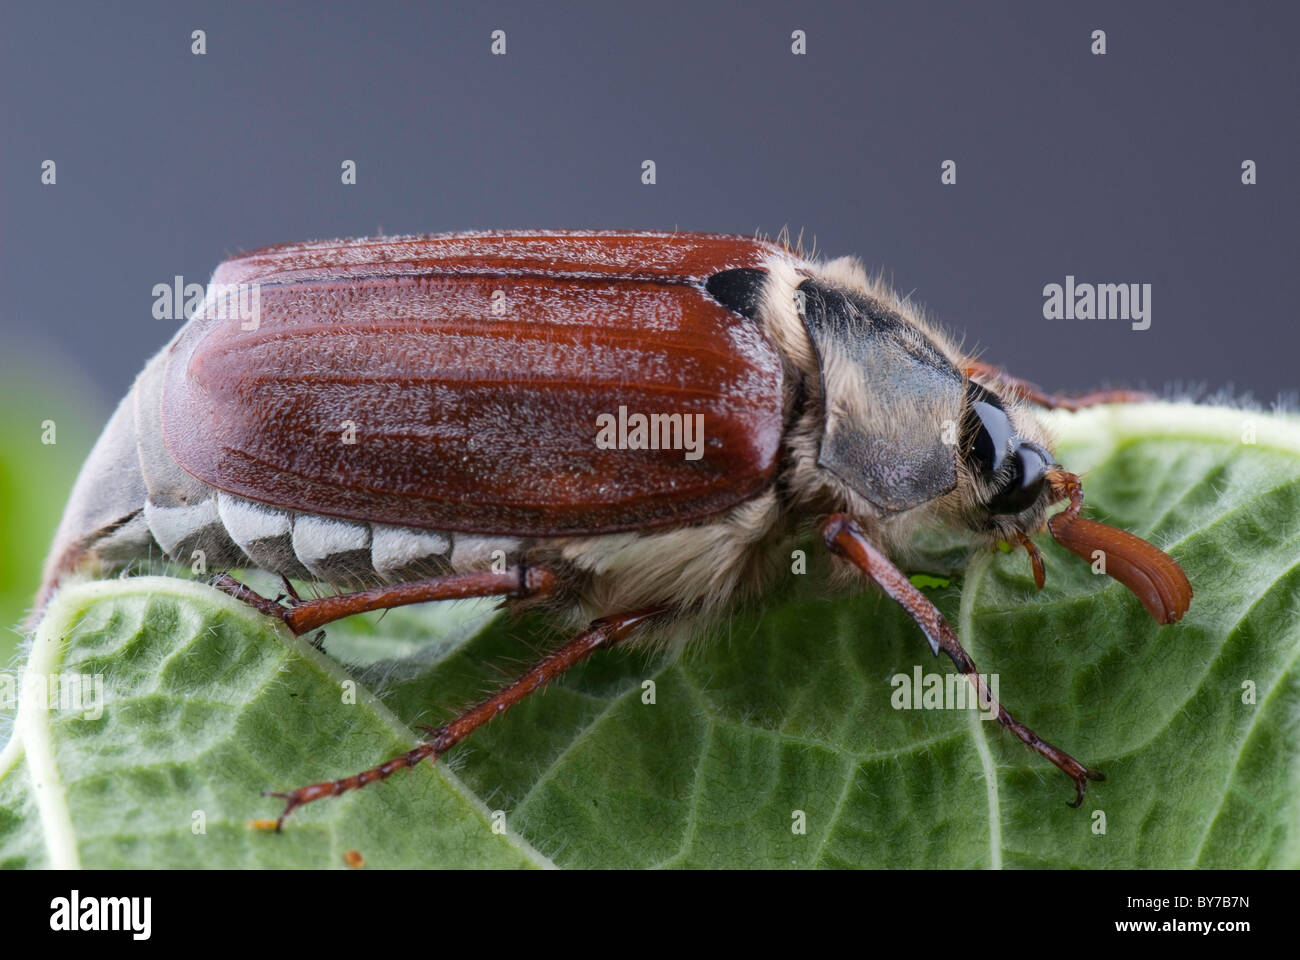 Adult Cockchafer Stock Photo